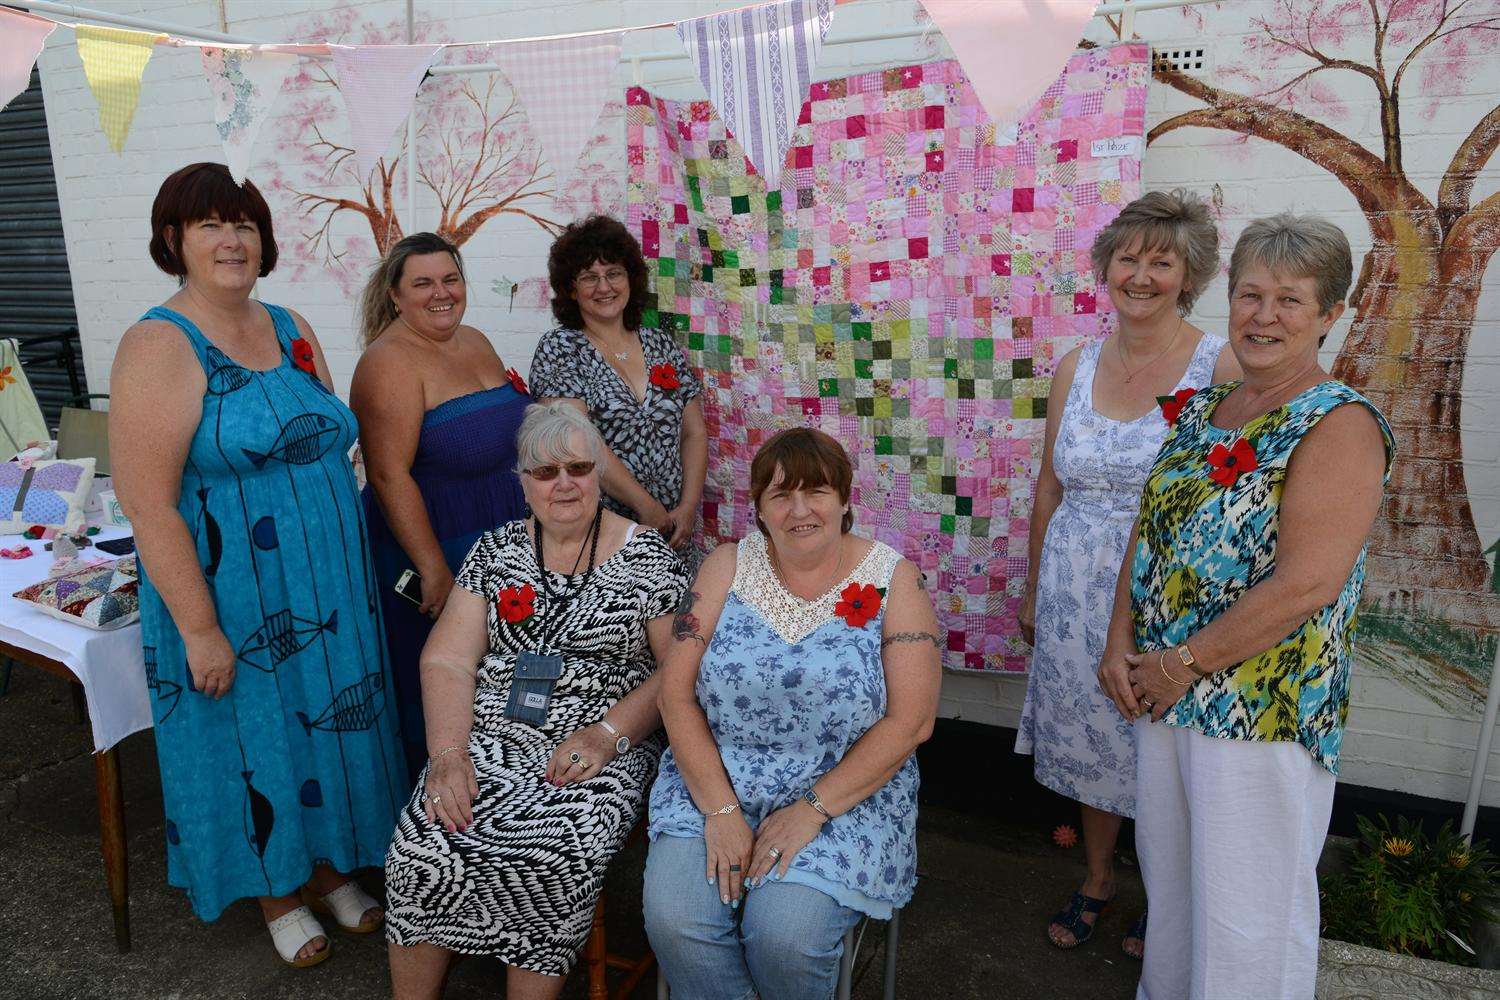 The Poppy Patchers have been fundraising for the Harmony Therapy Trust by raffling a quilt in the charity's colours